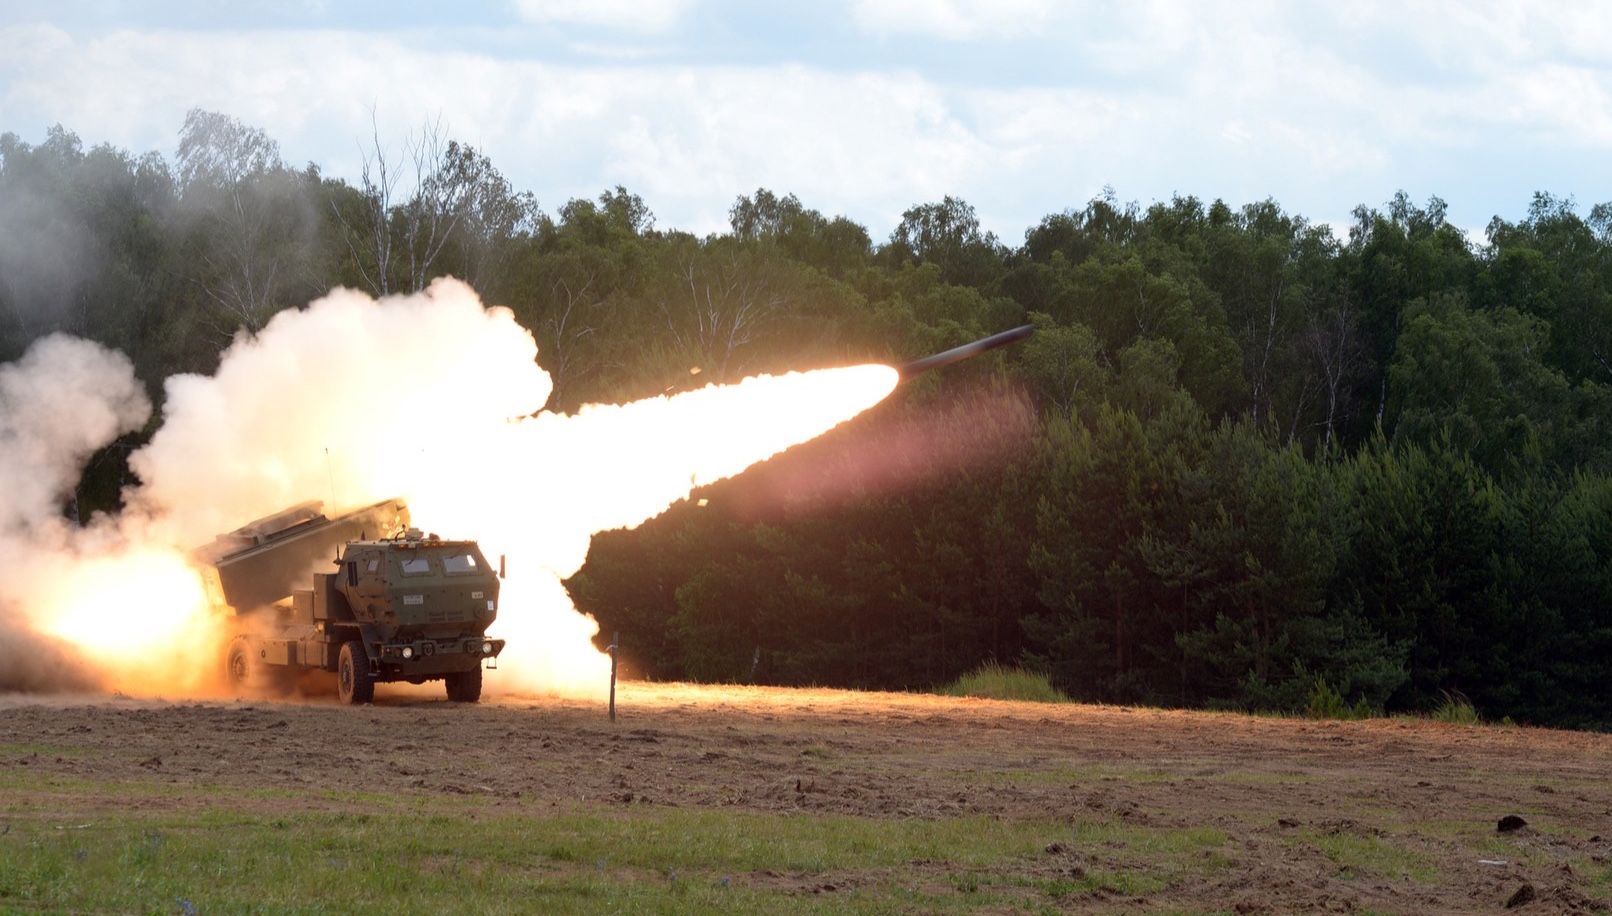 HIMARS systems